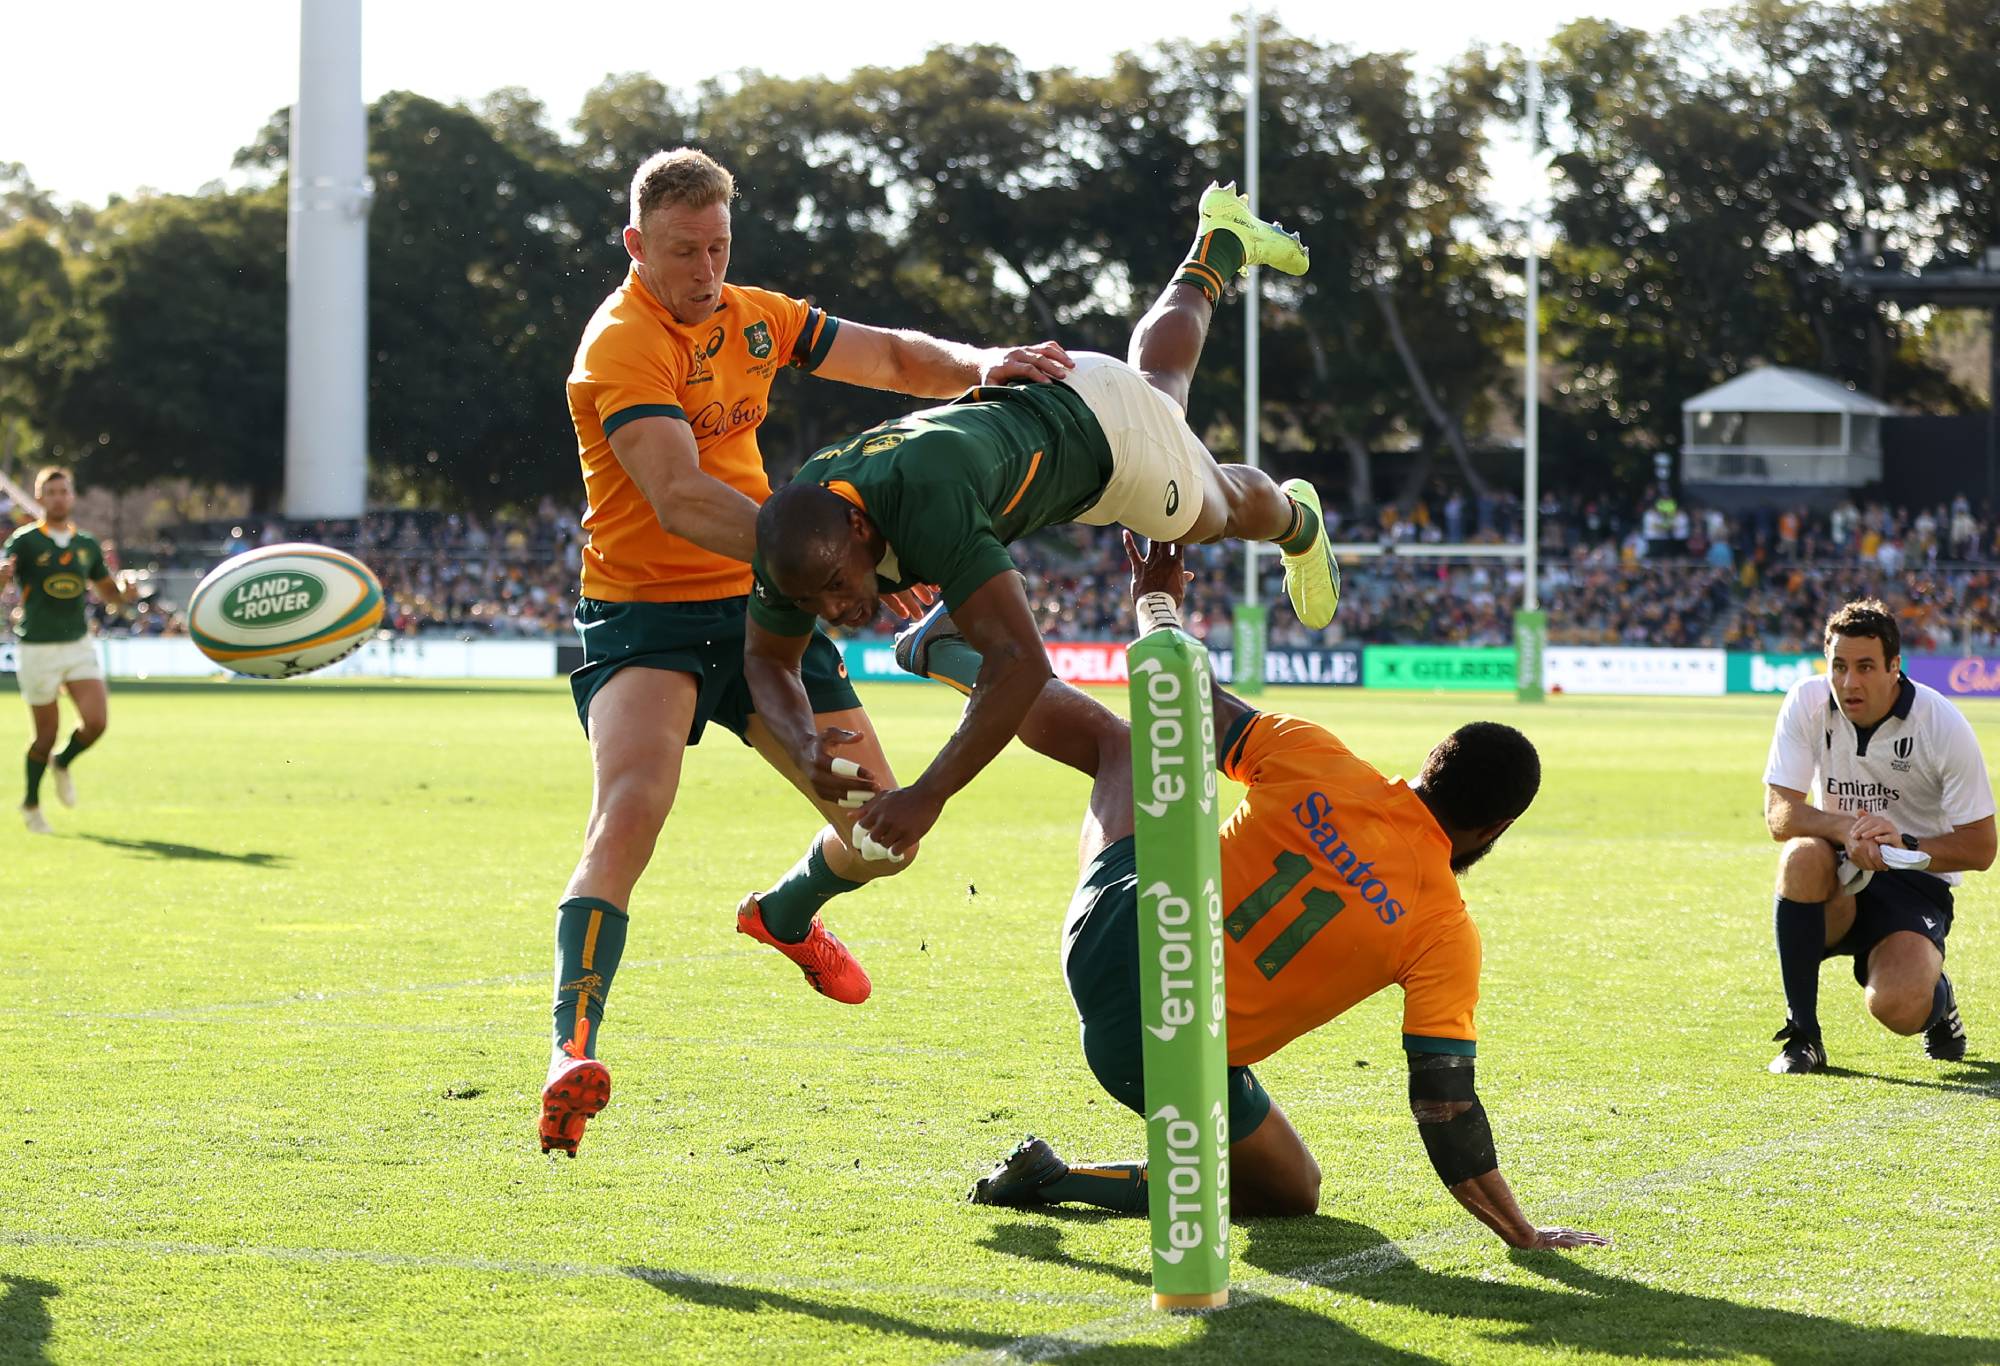 Makazole Mapimpi of the Springboks is tackled by Marika Koroibete of the Wallabies during The Rugby Championship match between the Australian Wallabies and the South African Springboks at Adelaide Oval on August 27, 2022 in Adelaide, Australia. (Photo by Mark Kolbe/Getty Images)